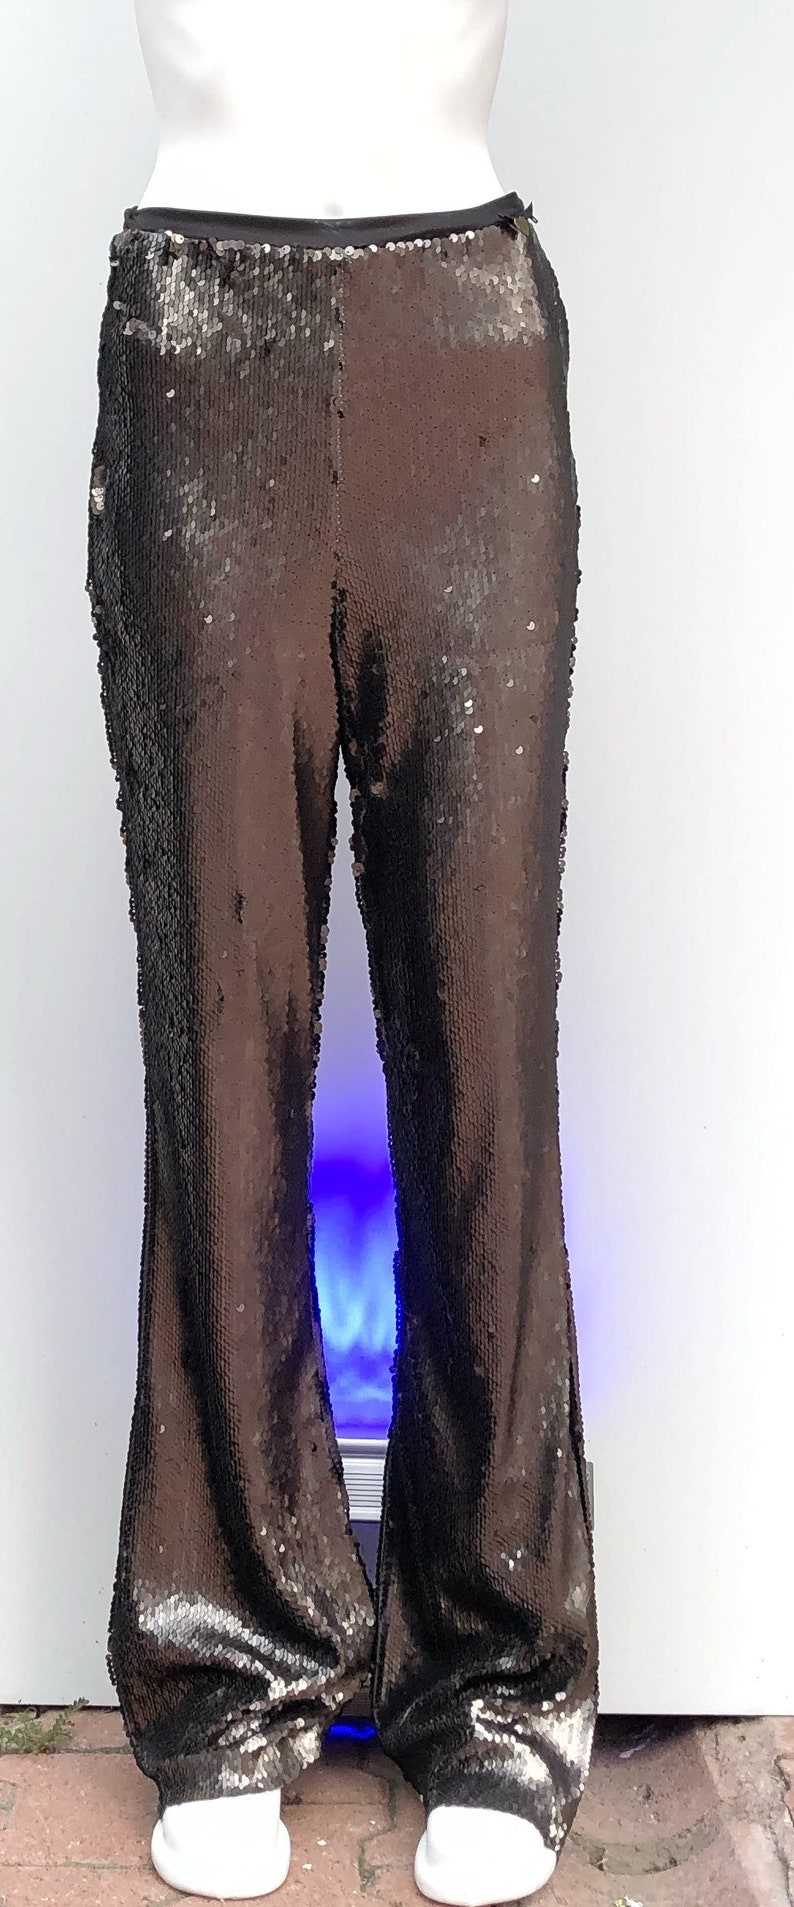 Eye-catching Men's Black Sequin Pants to Make a Statement